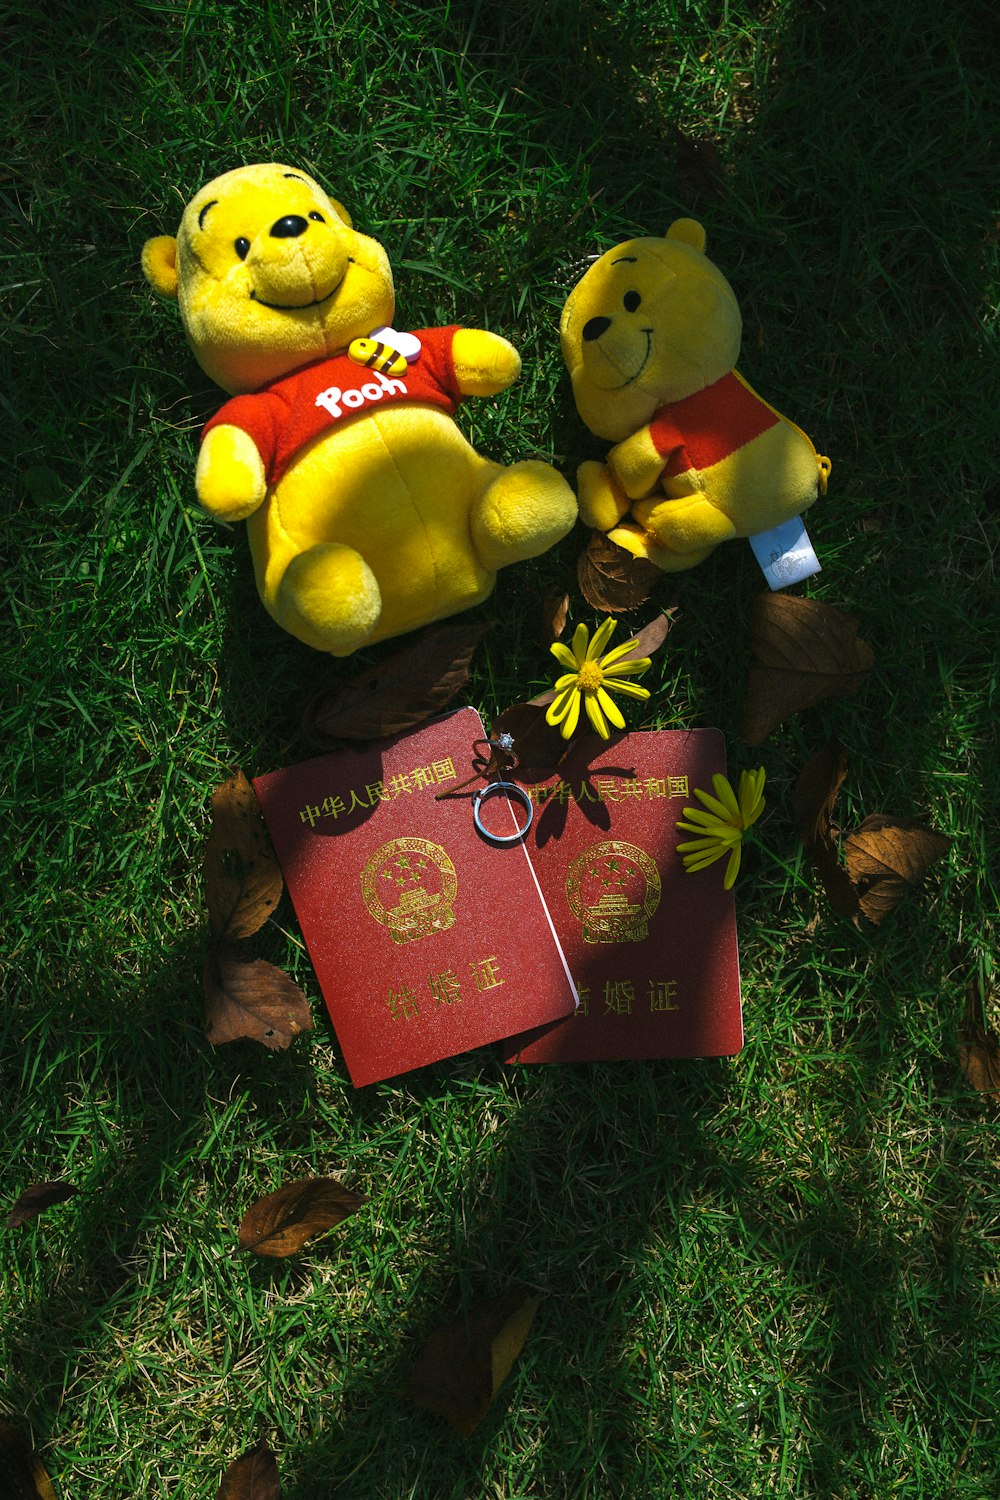 winnie the pooh plush toy on red book